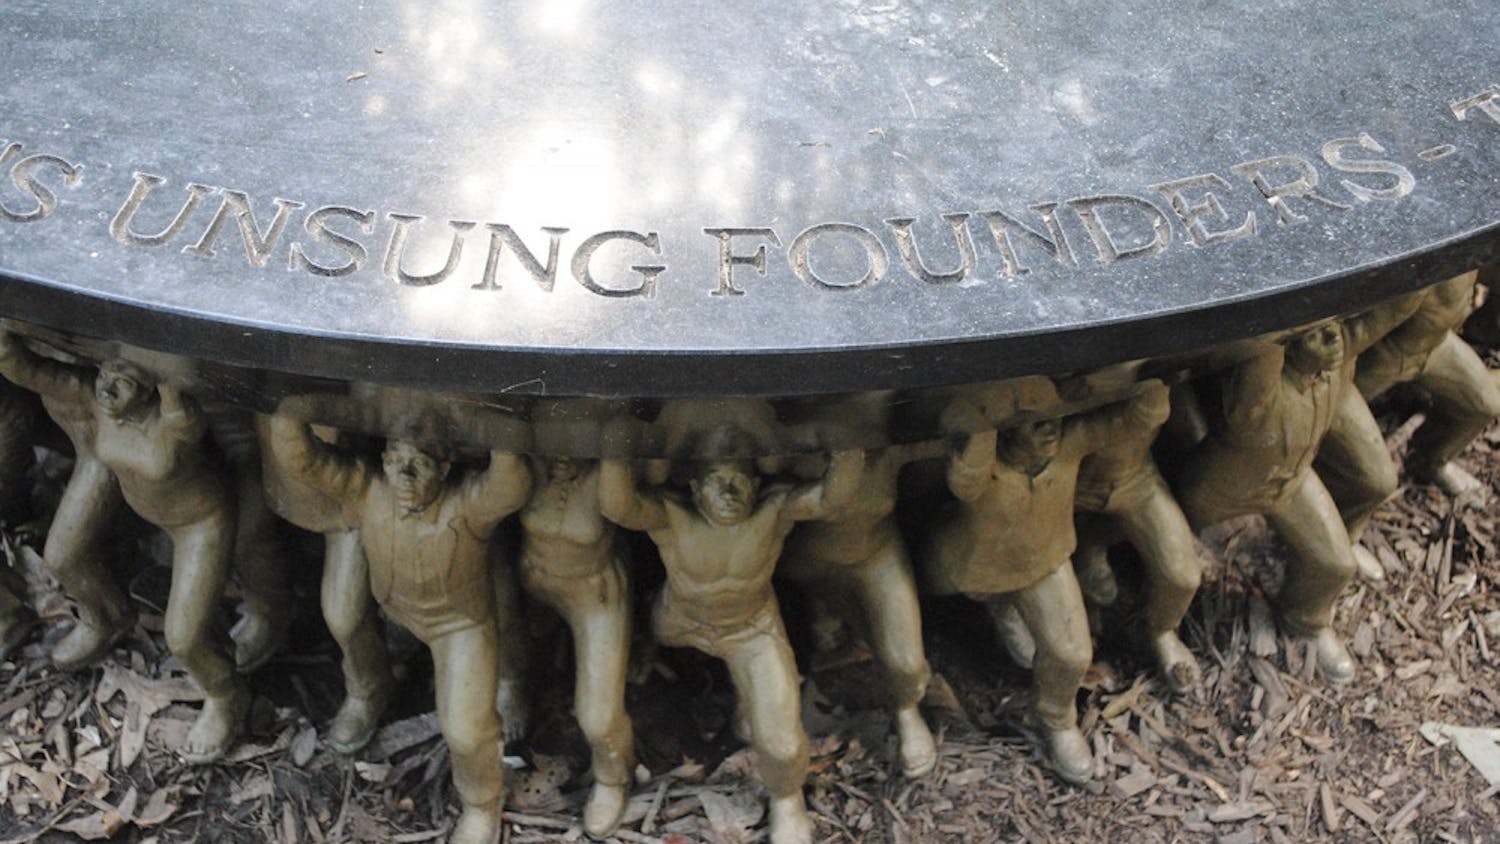 The Unsung Founders Memorial, found in McCorkle Place, reads "The class of 2012 honors the university's unsung founders- the people of color, bound and free, who helped build the Carolina that we cherish today."